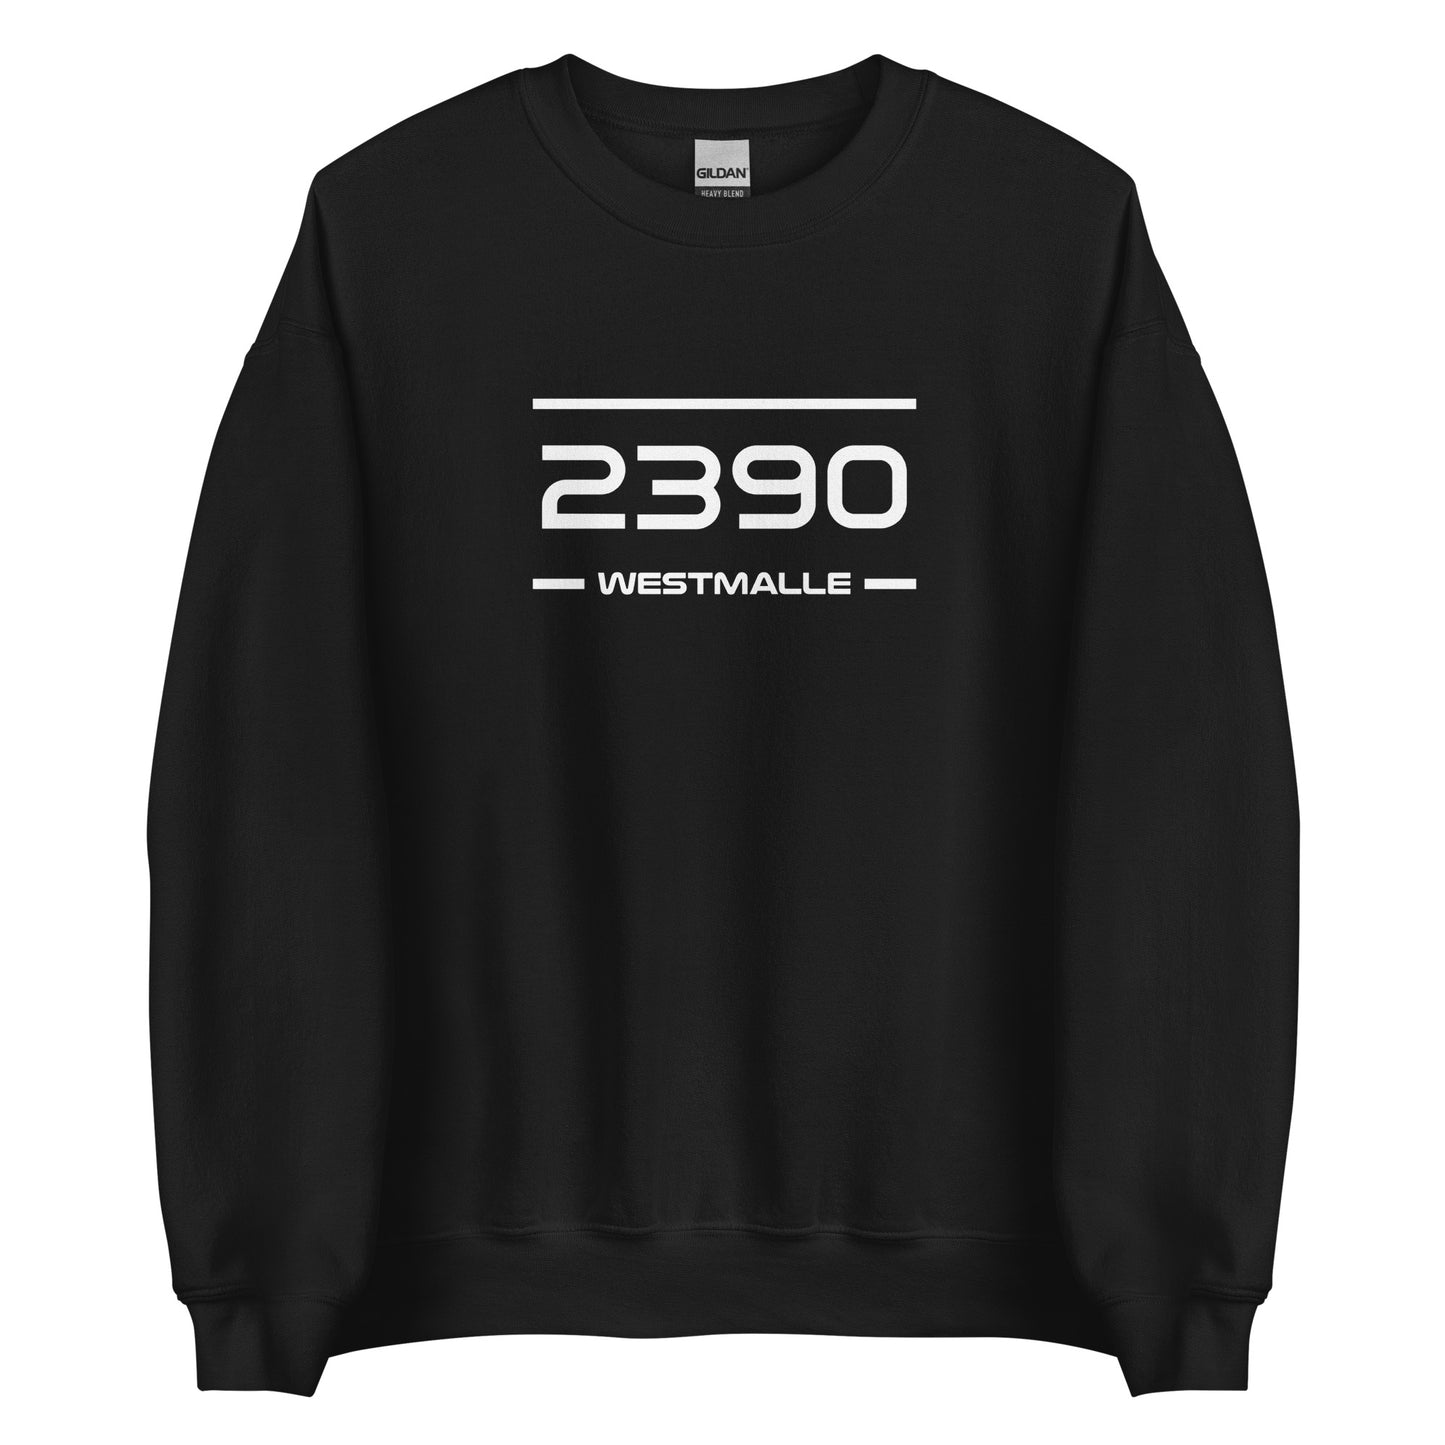 Sweater - 2390 - Westmalle (M/V)